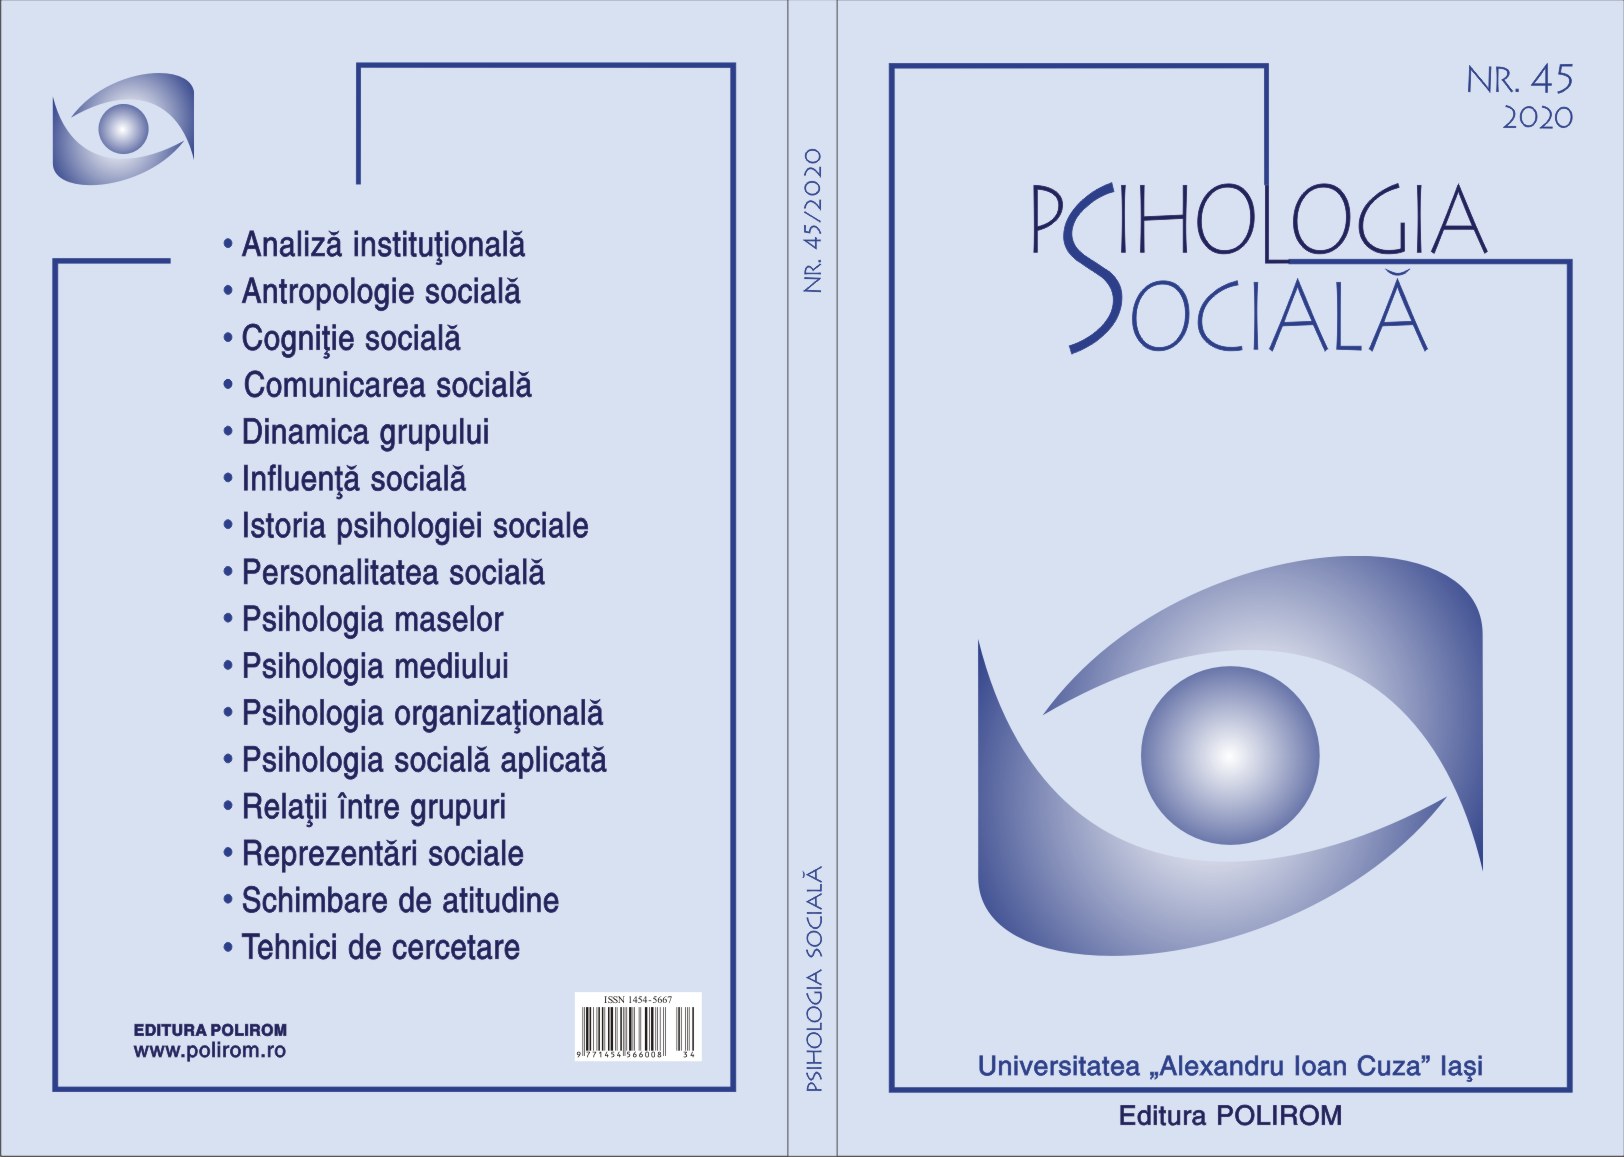 Preliminary structural investigation of the Romanian version of Attitudes towards Prisoners scale: How many factors are there and why are they ambivalent? Cover Image